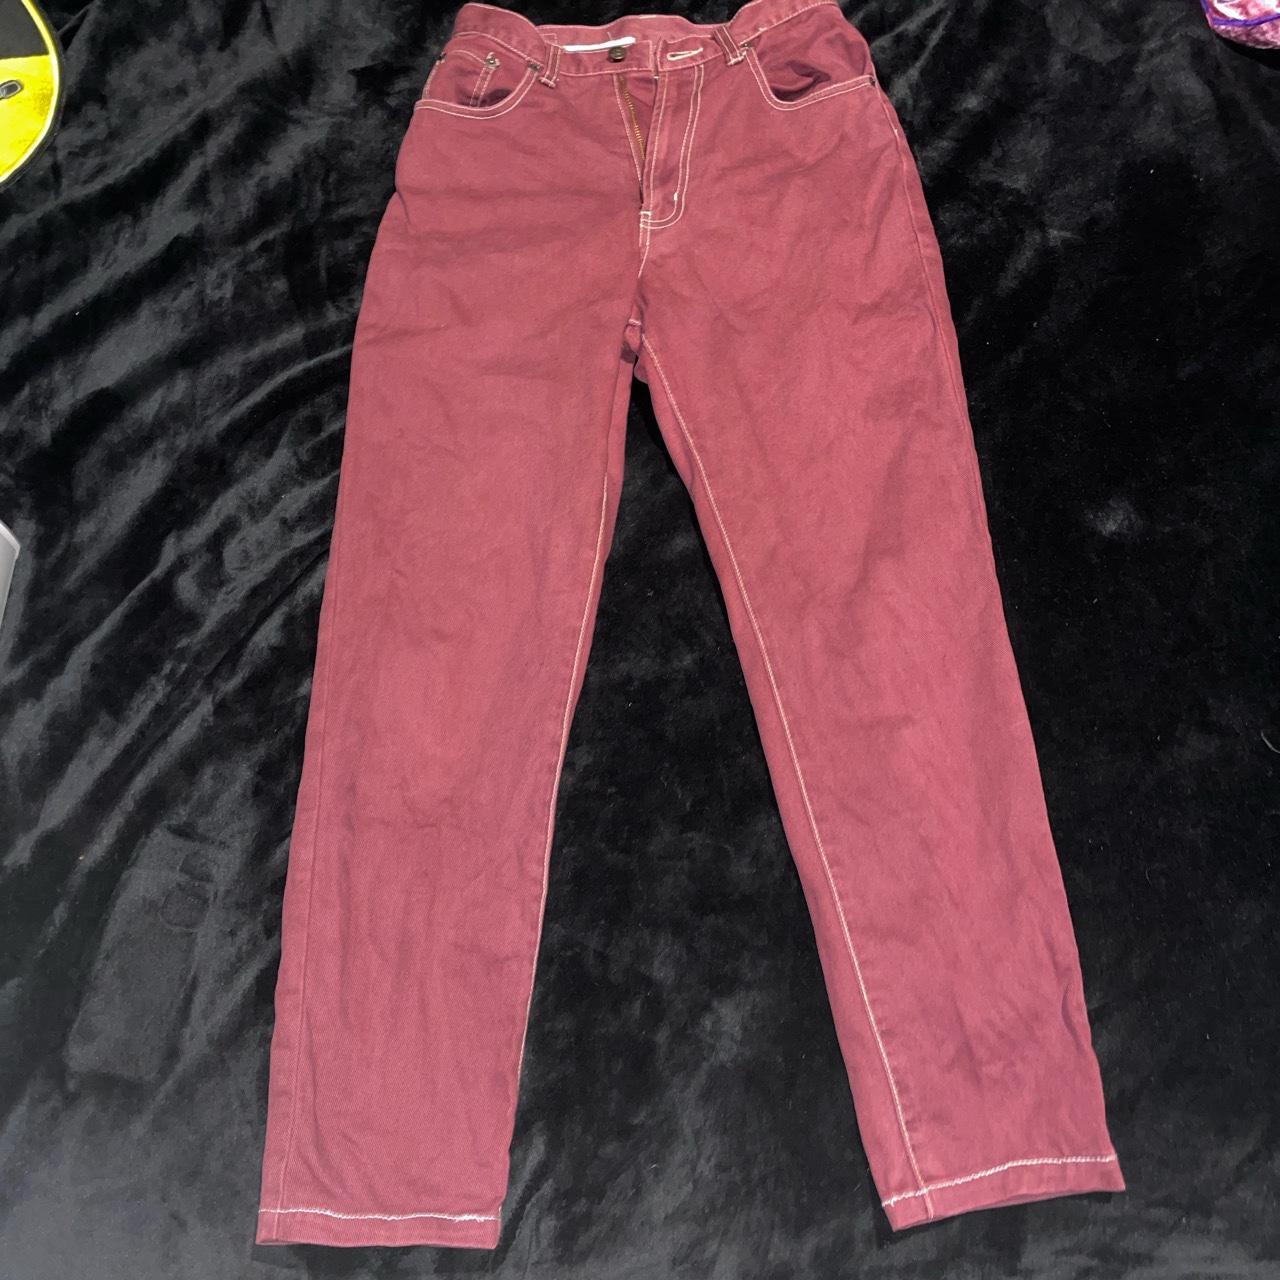 REPOP!!! burgundy jeans -only worn a couple times,... - Depop